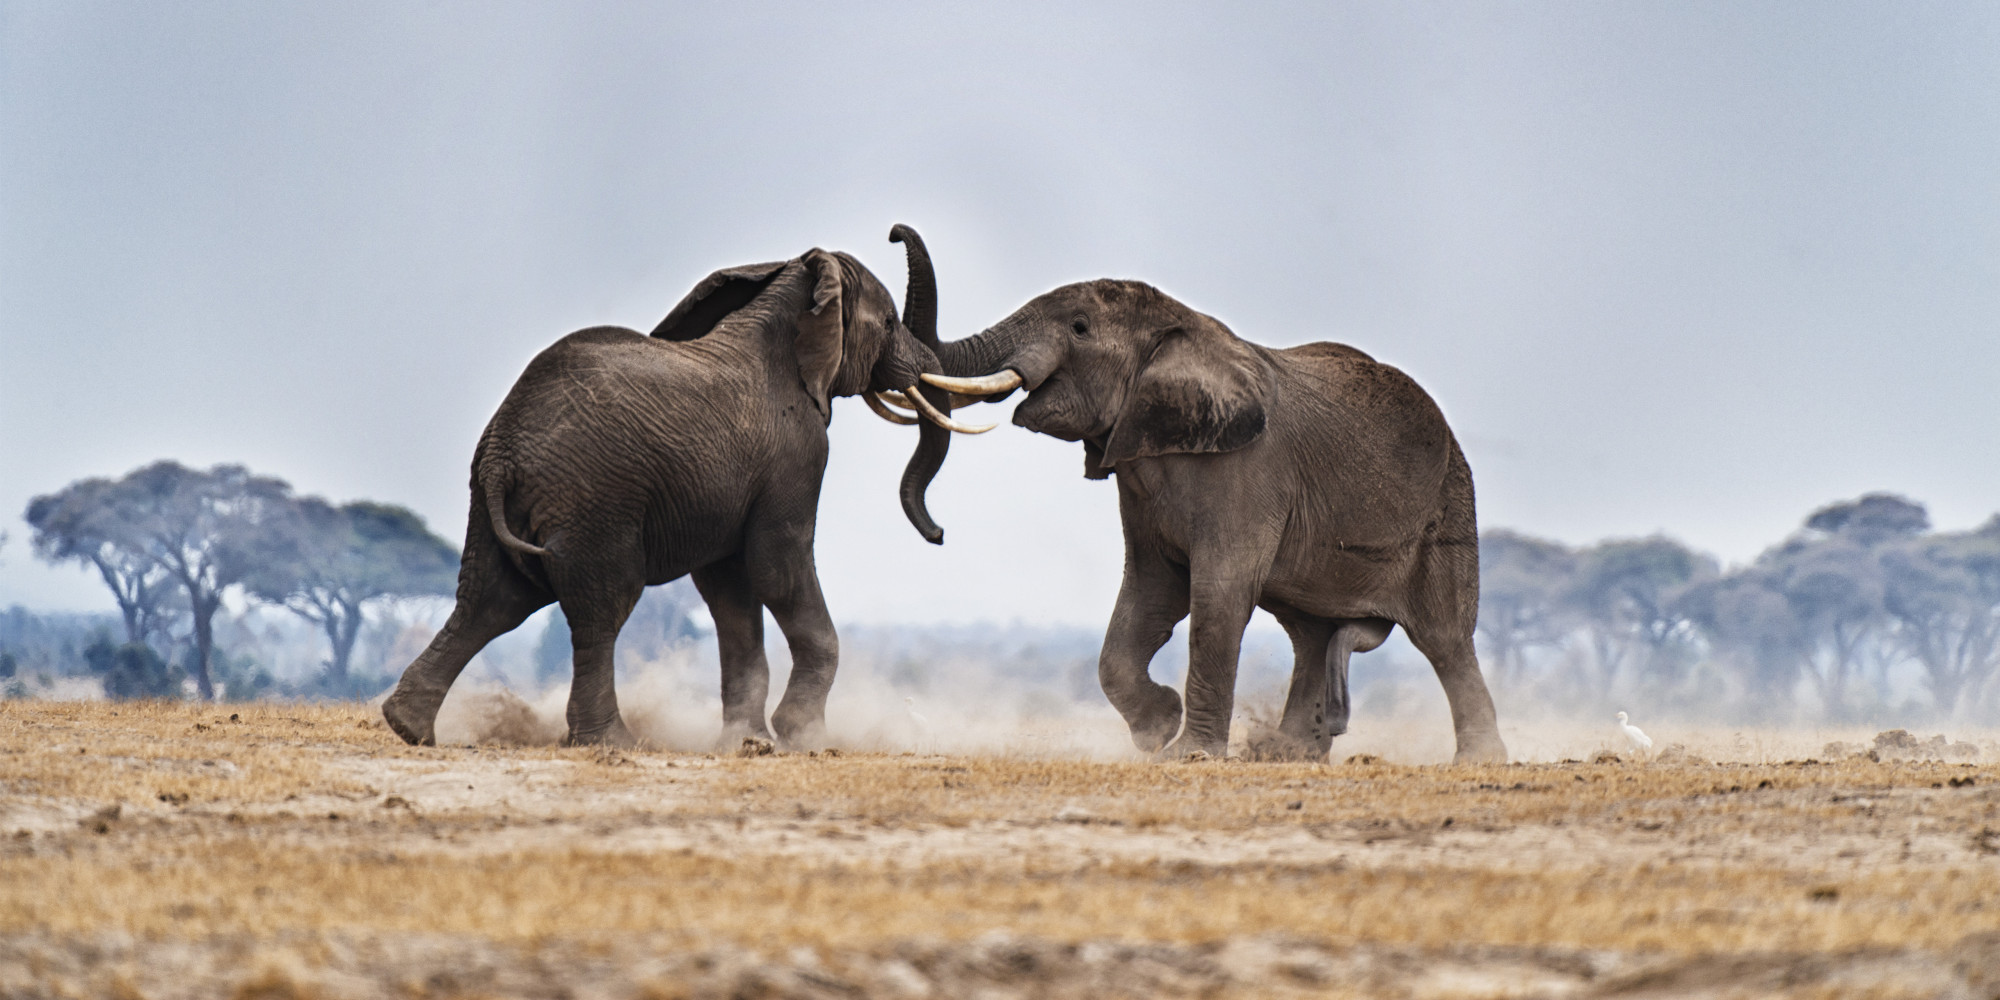 High Quality Two elephants fighting - disarray in the Republican Party, GOP Blank Meme Template